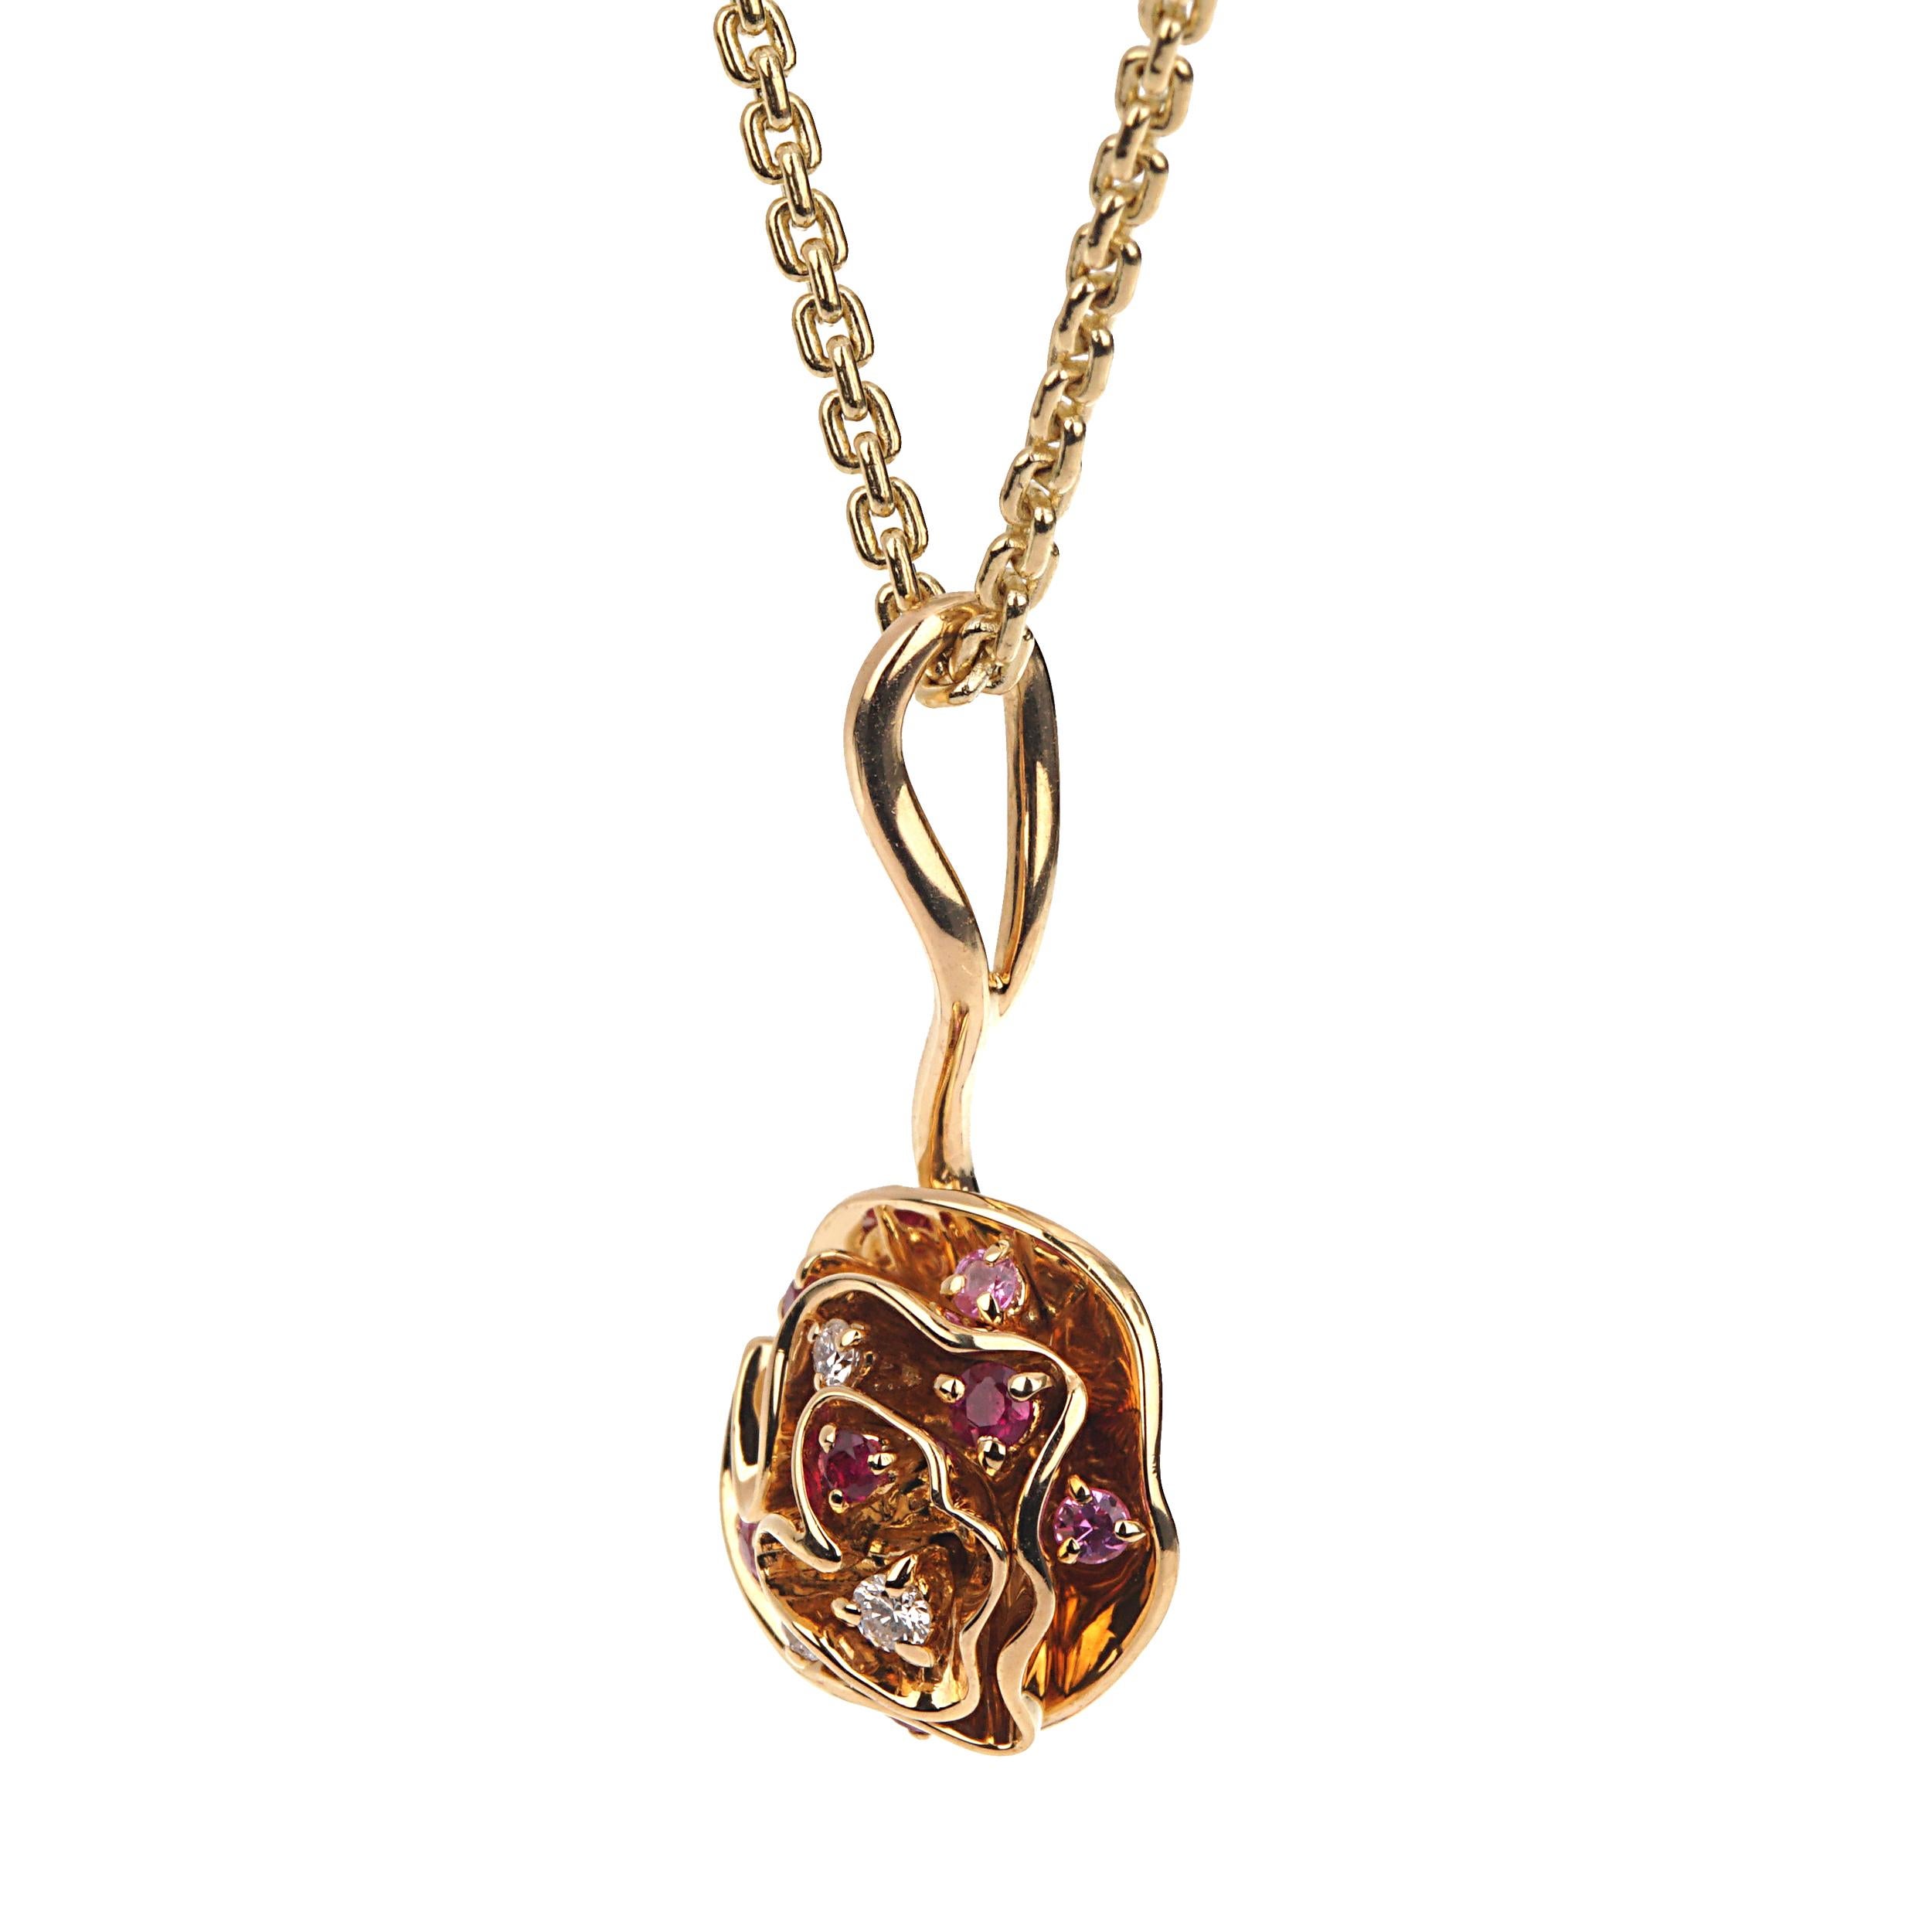 The Louis Vuitton Flower Pendant Necklace is an emblem of sophistication and vibrant elegance, meticulously crafted to stand as a testament to the brand's heritage of luxury and craftsmanship. This exquisite necklace measures an ideal 19 inches in